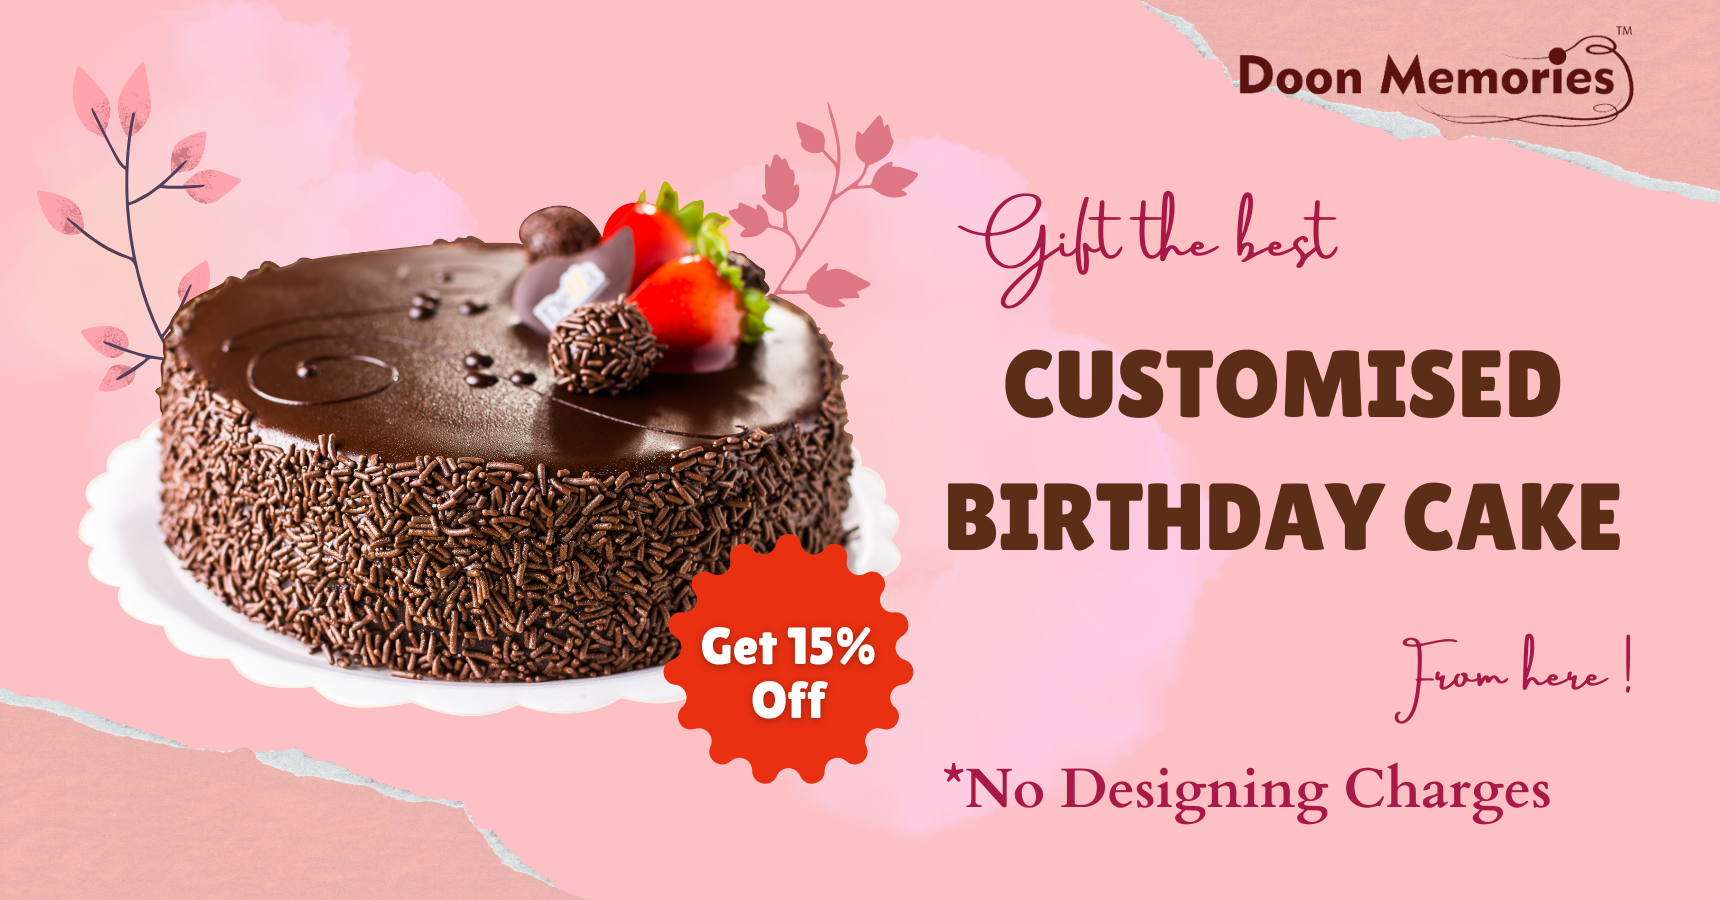 Cakelets Cake And Cafe in Near Charoli Phtata,Pune - Best Cake Shops in  Pune - Justdial